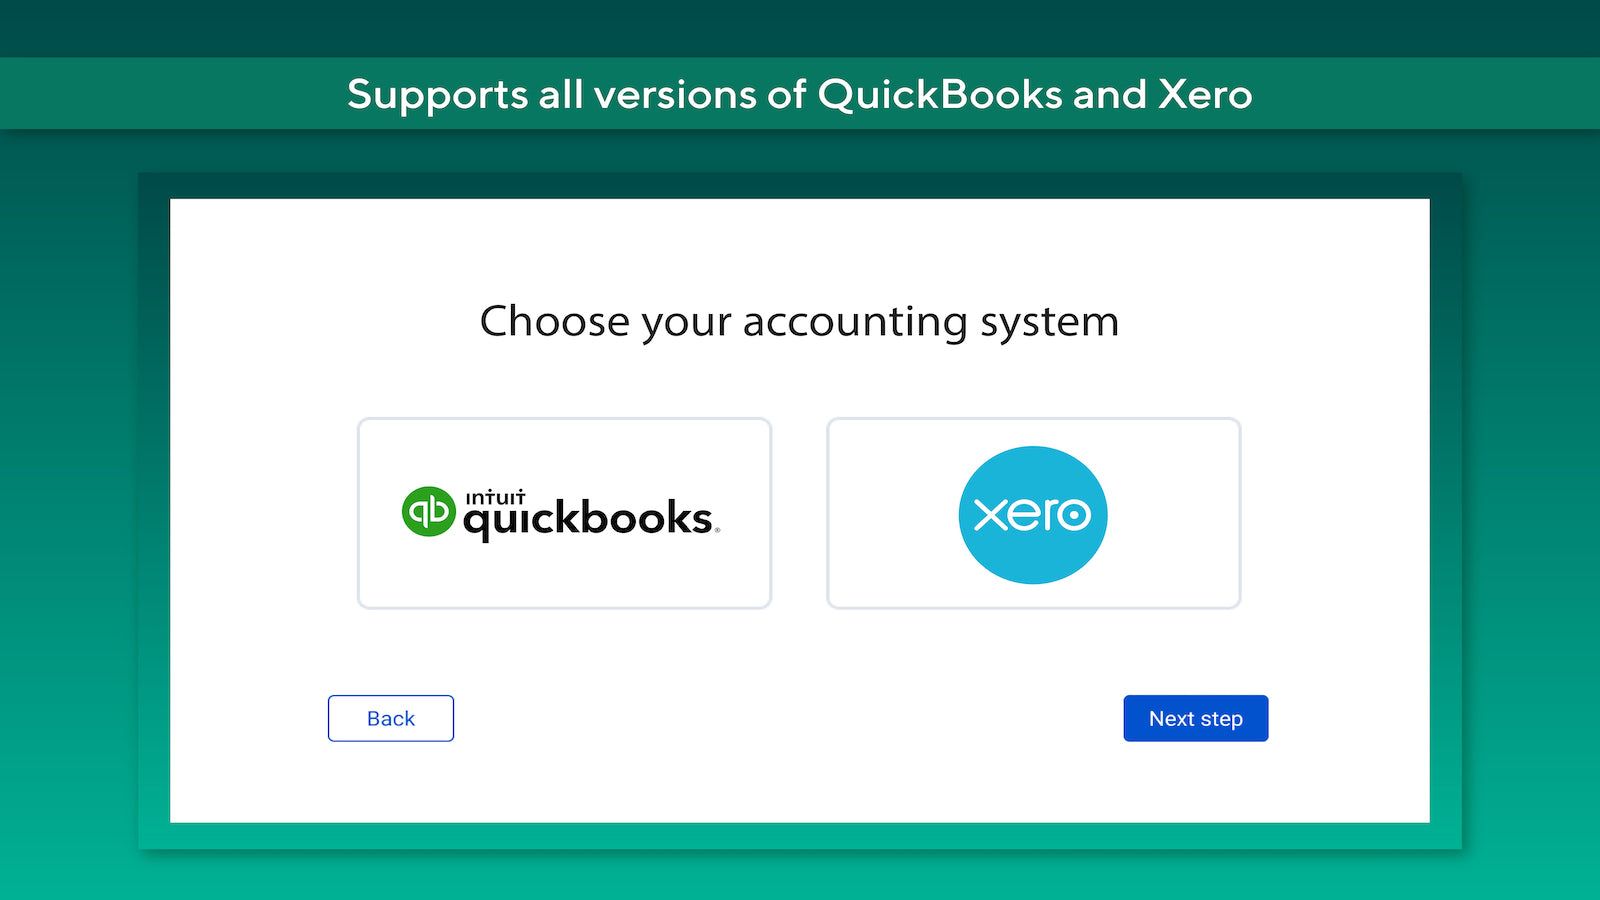 Supports all versions of QuickBooks or Xero